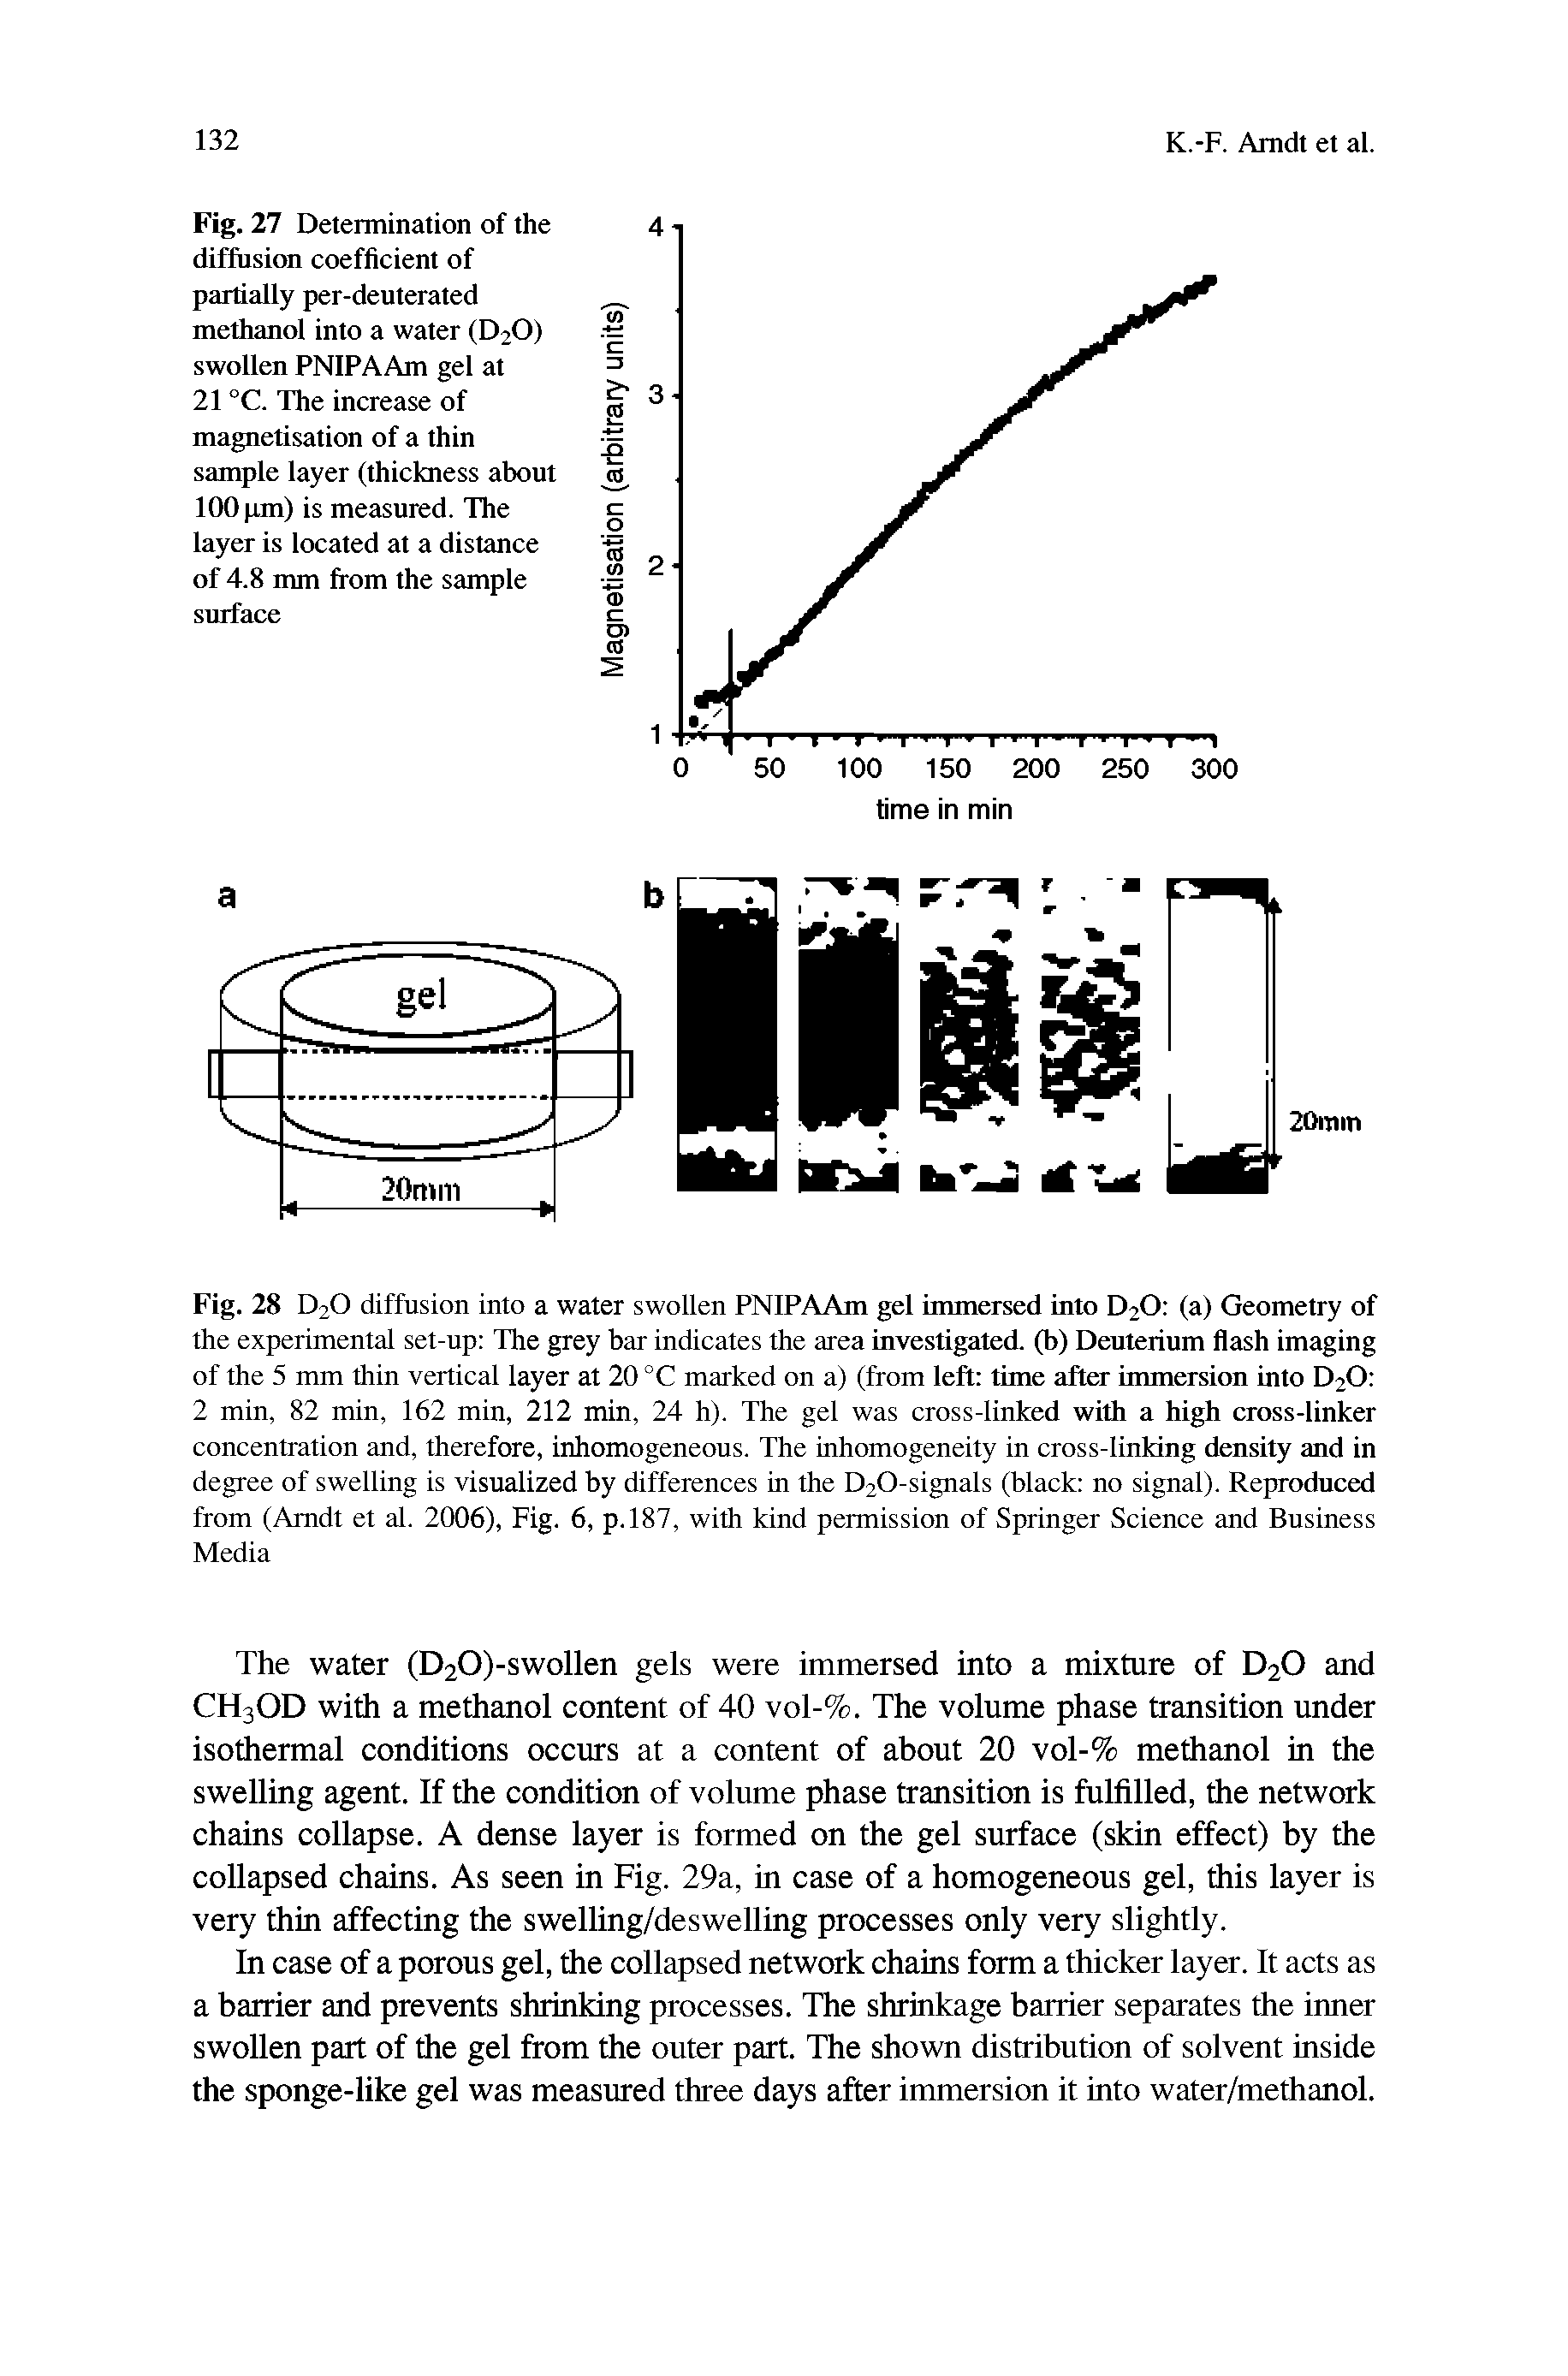 Fig. 27 Determination of the diffusion coefficient of partially per-deuterated methanol into a water (D2O) swollen PNIPAAm gel at 21 °C. The increase of magnetisation of a thin sample layer (thickness about 100 pm) is measured. The layer is located at a distance of 4.8 mm from the sample surface...